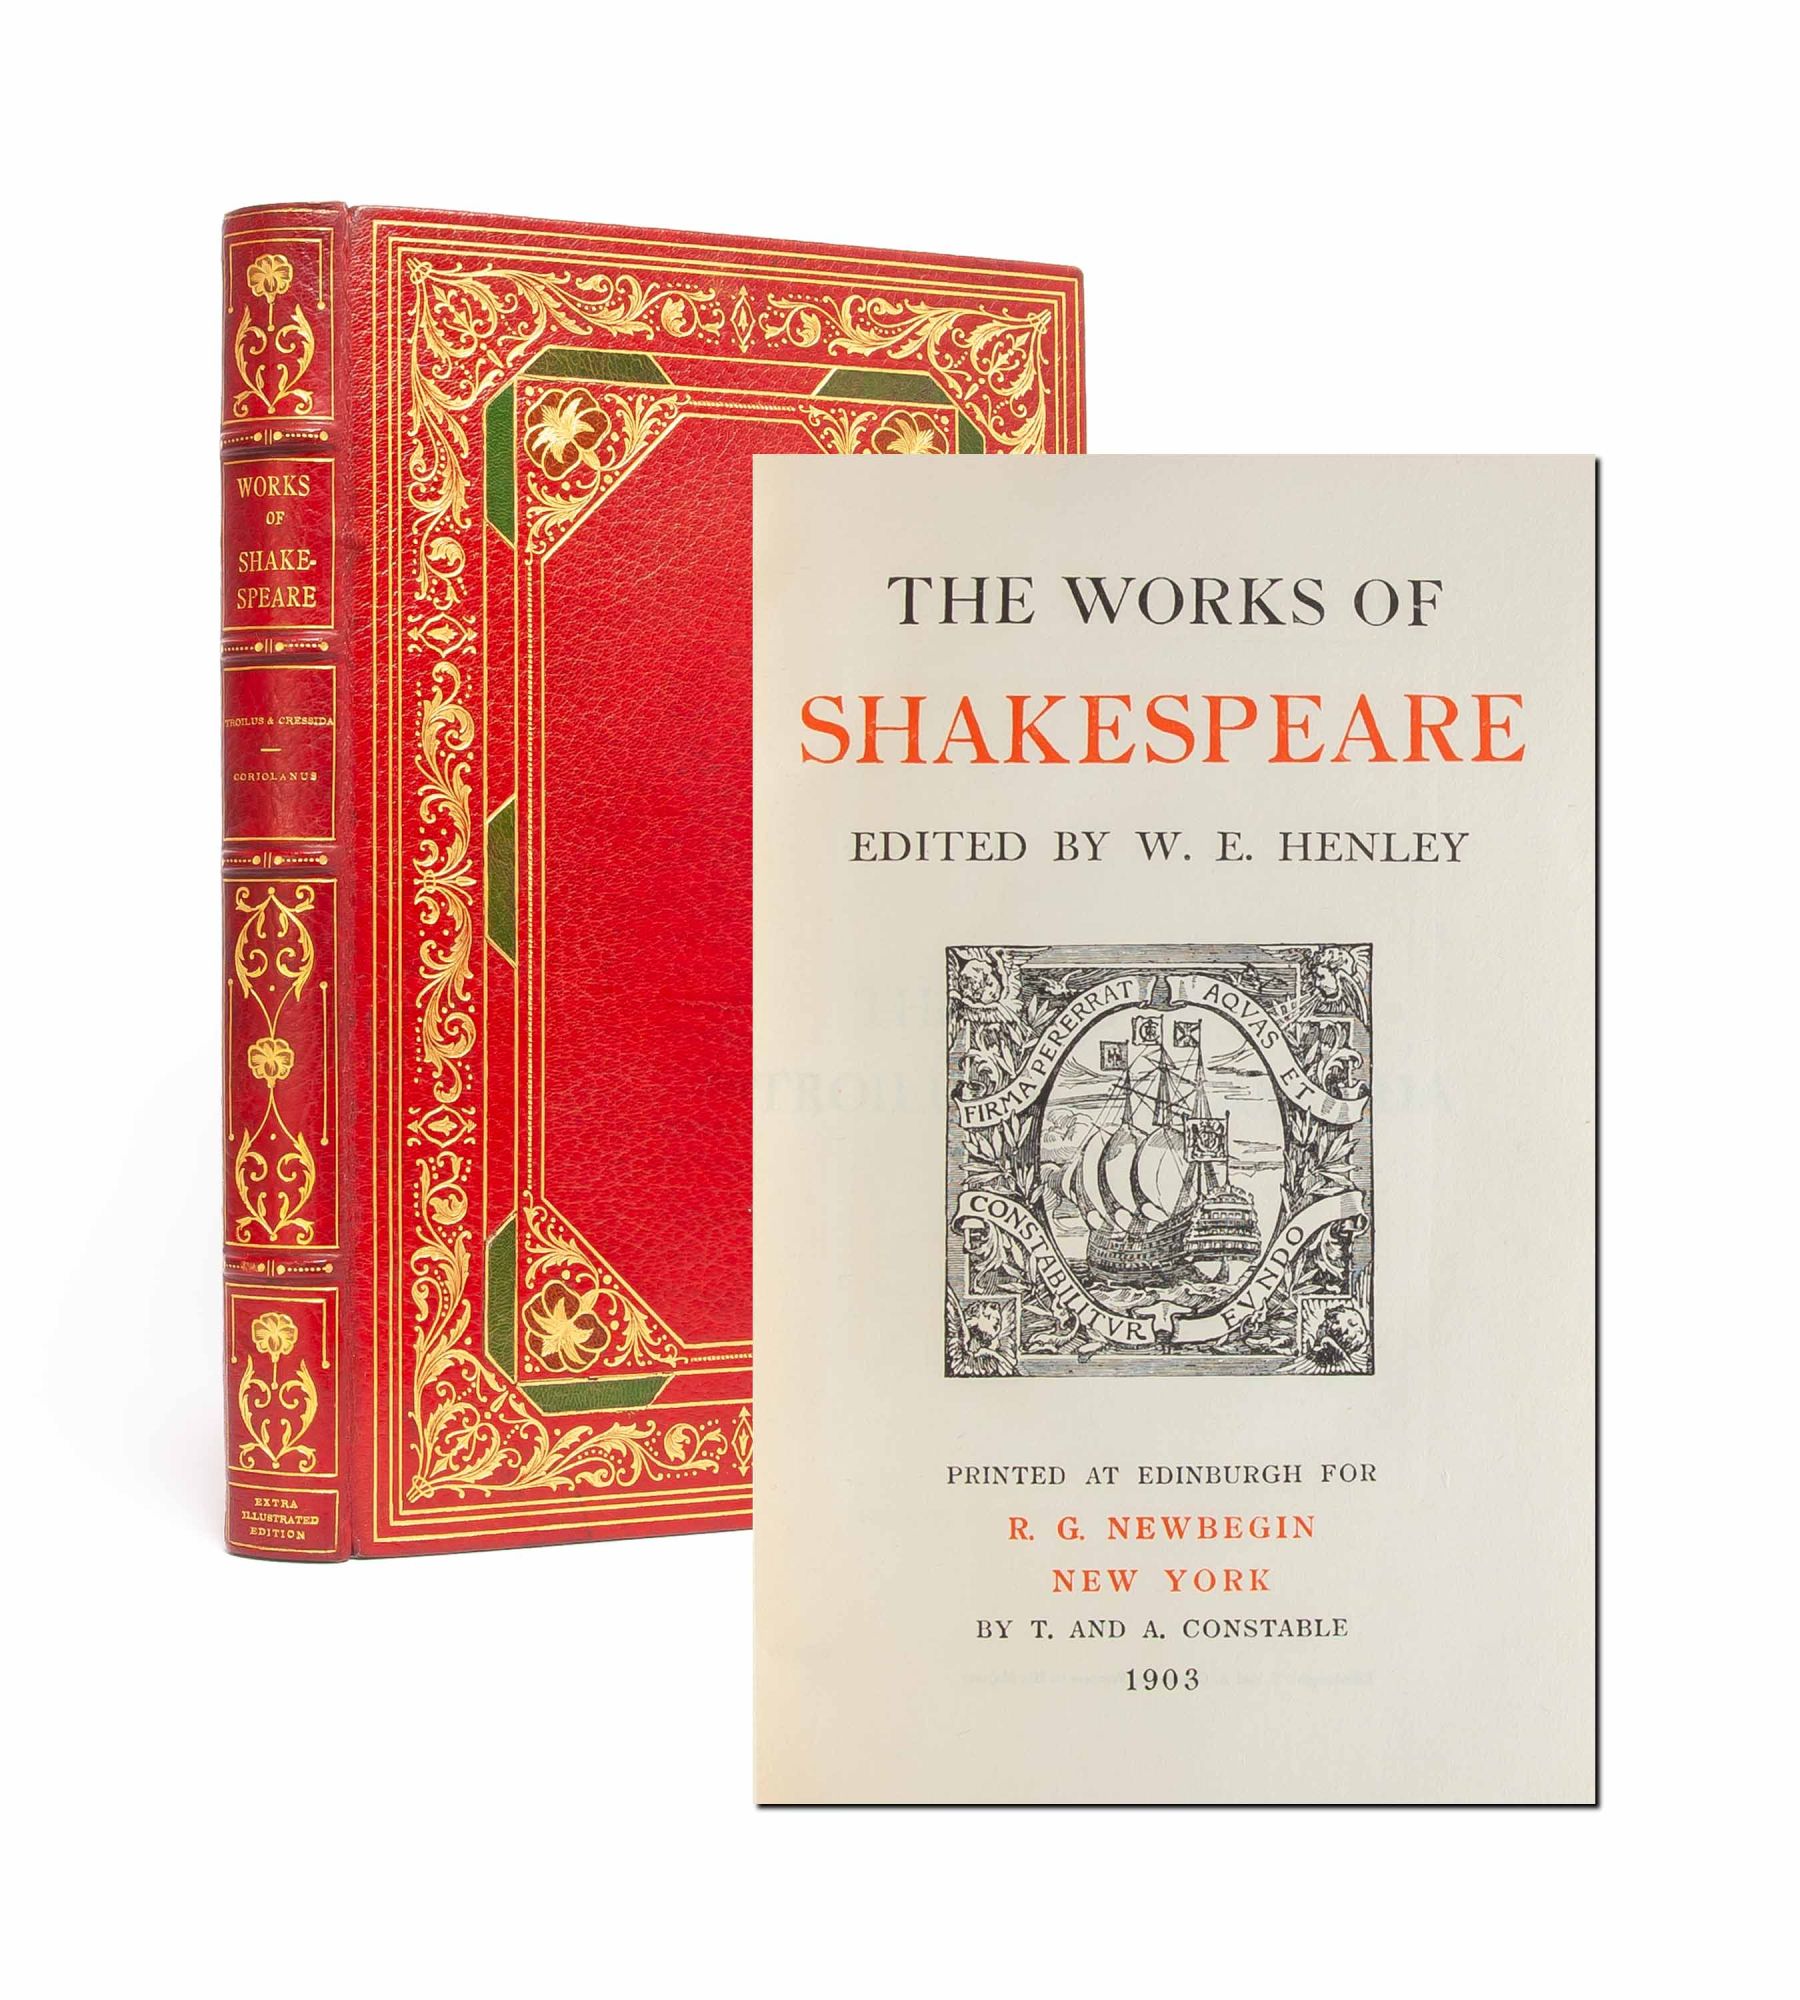 (Item #5320) The History of Troilus and Cressida [from] The Works of Shakespeare (Extra-Illustrated). William Shakespeare, W. E. Henley.